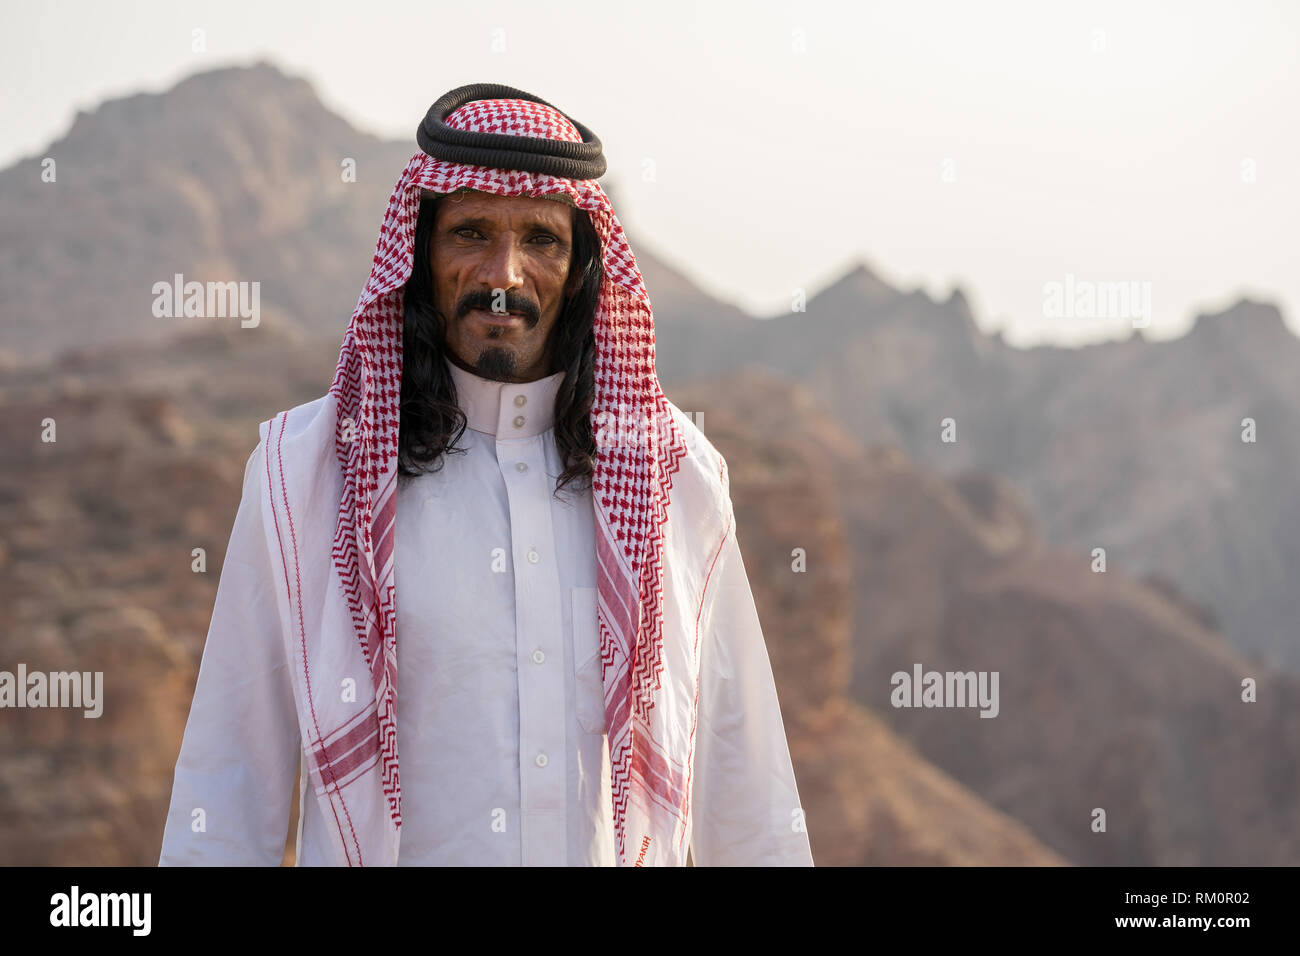 Warmth and hospitality shown through the face of this Bedouin man in the mountains of Jordan near Petra. Stock Photo